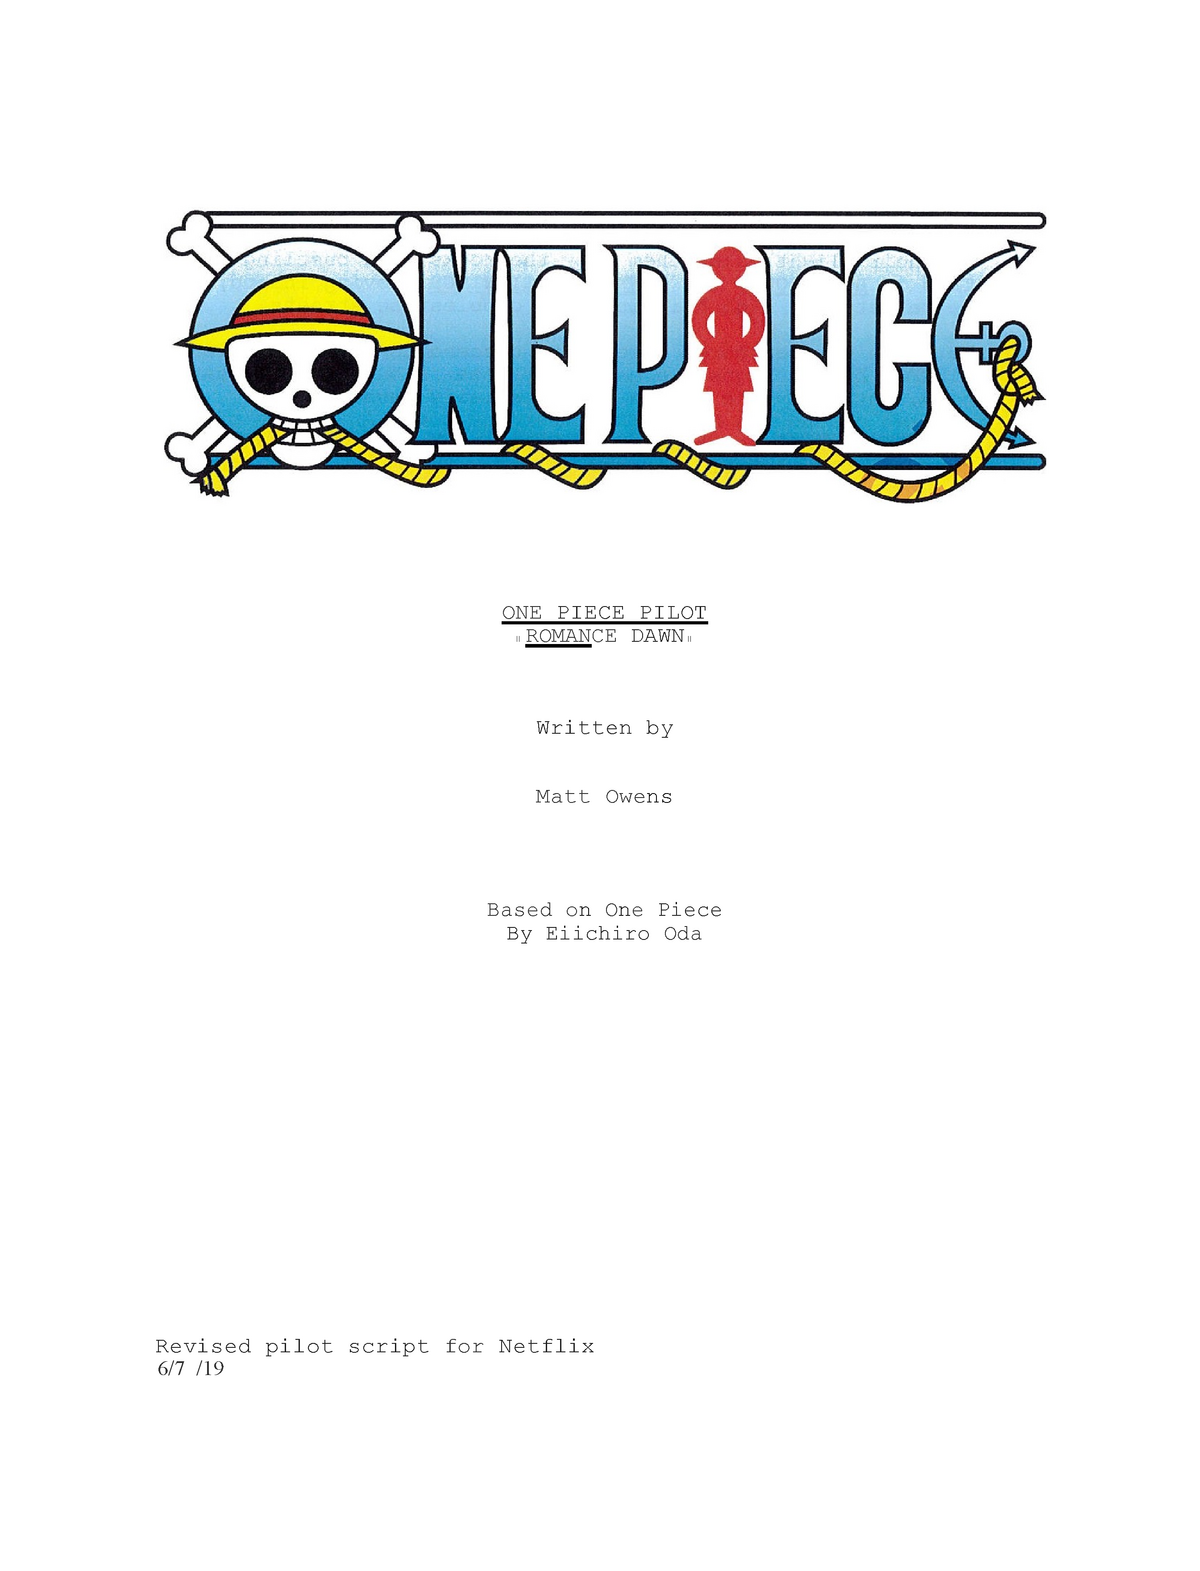 So the leaked ep 1 script for the live action One Piece is pretty